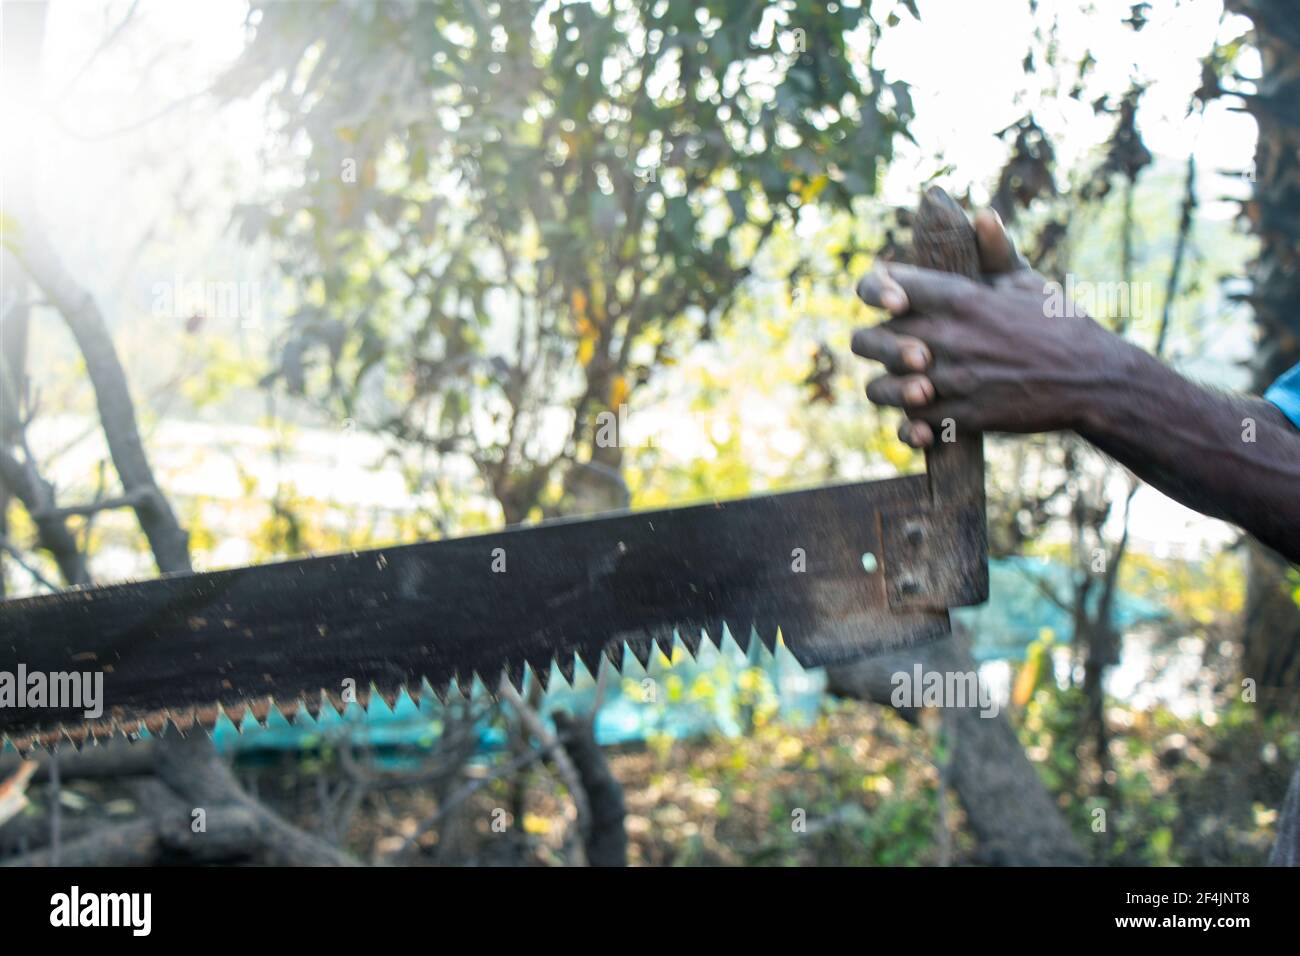 Close-up of woodcutter sawing chain saw in motion, bring down trees concept Stock Photo